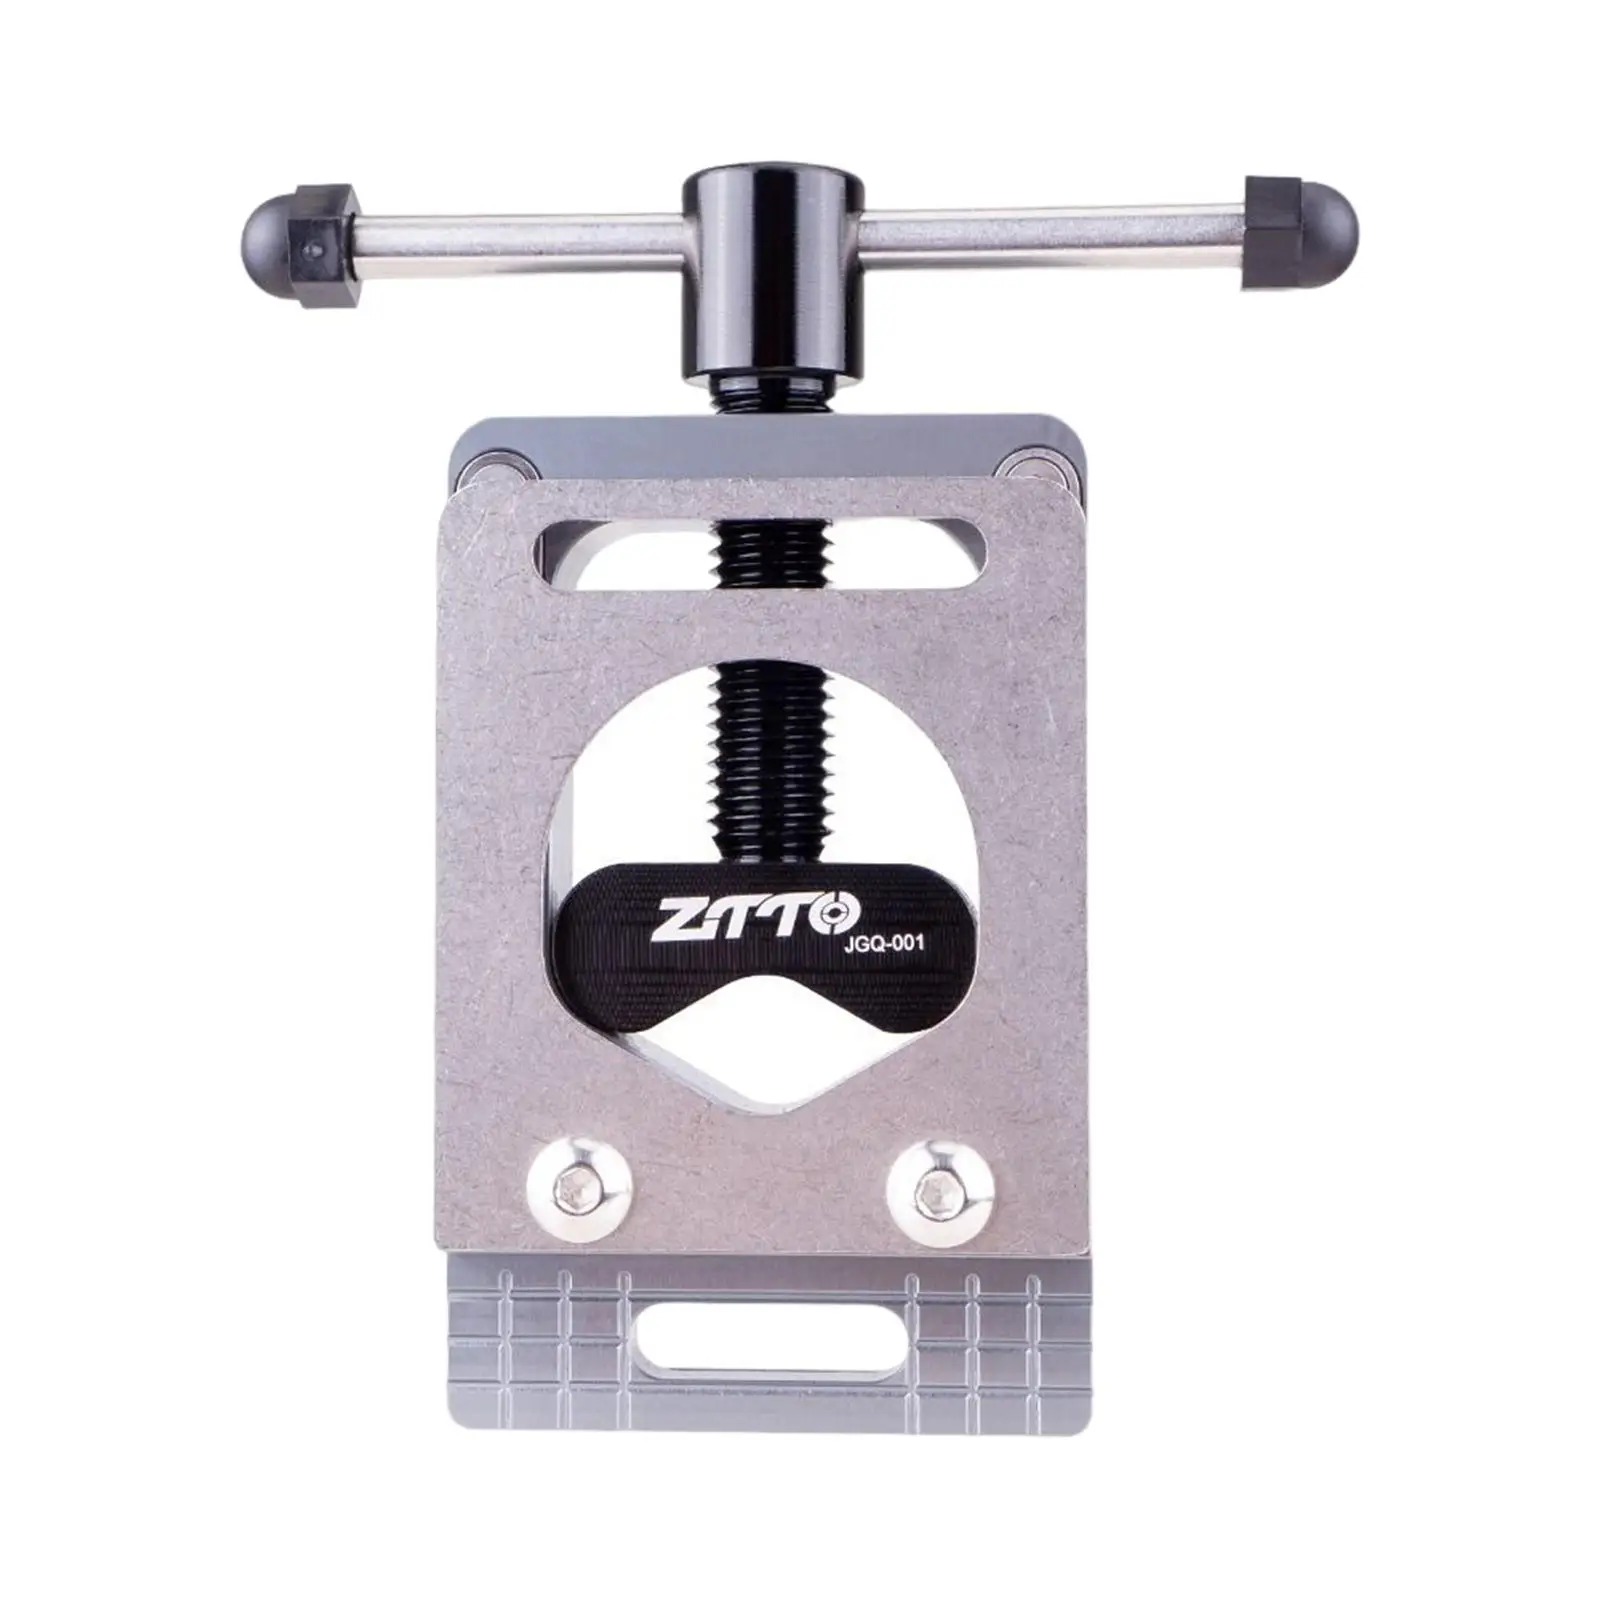 Bike Saw Guide, Cutting Saw Guide, 10-40mm Adjustable, Front Fork Seat Tube Cutting Tool